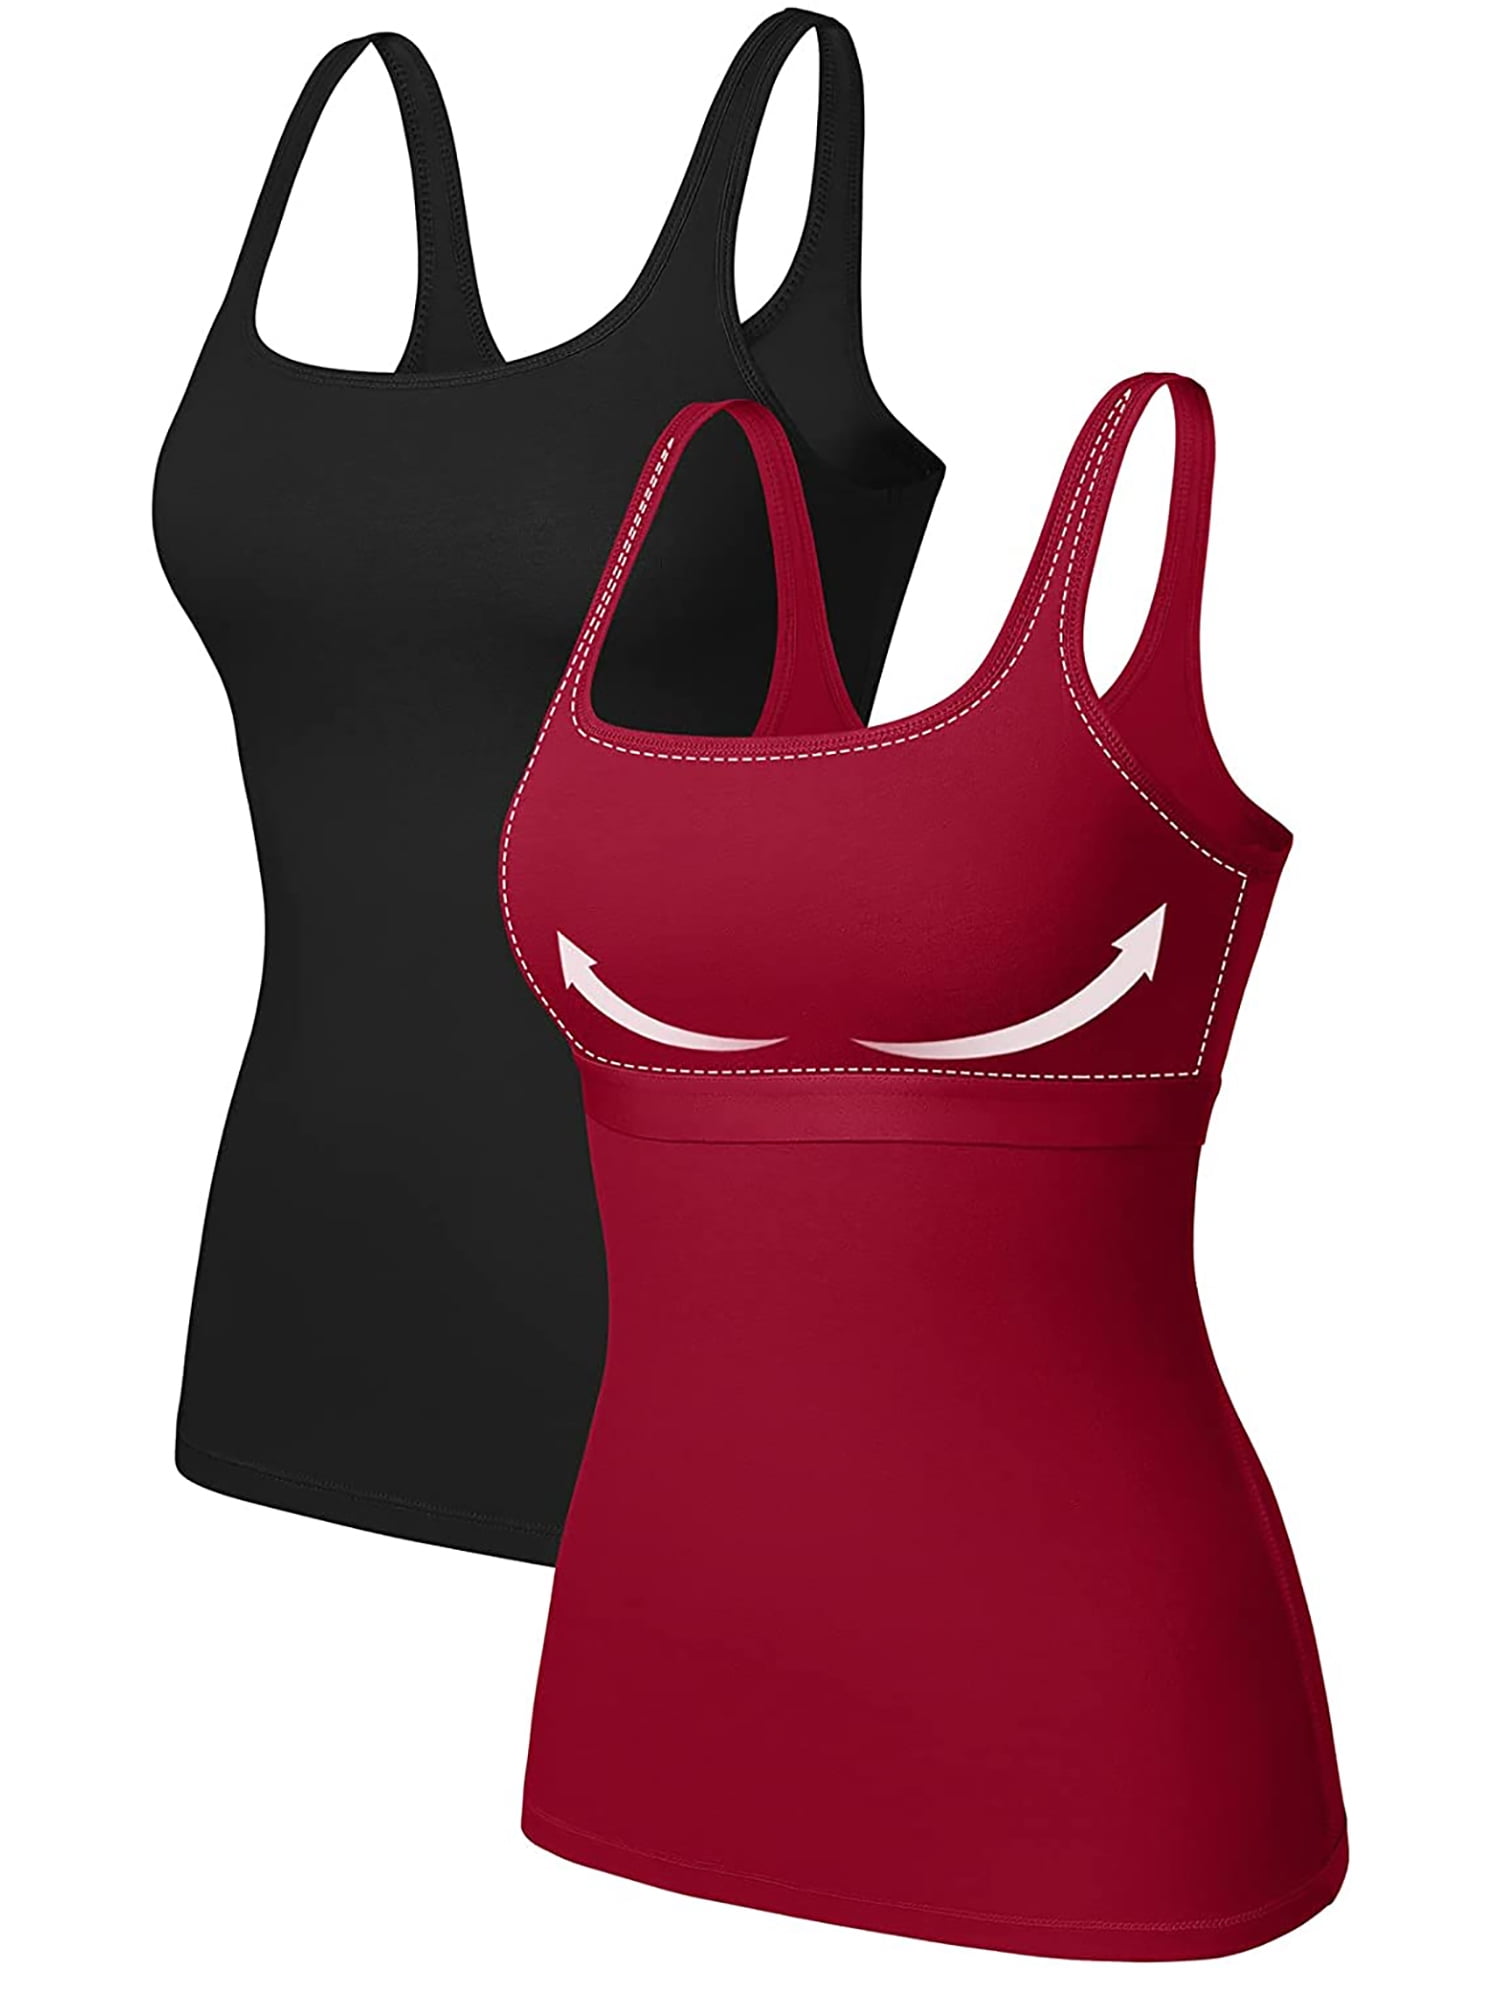 CAICJ98 Lingerie for Women Tank with Built In Bra Womens Tank Tops  Adjustable Strap Stretch Cotton Camisole with Built In Padded Shelf Bra  Watermelon Red,40 